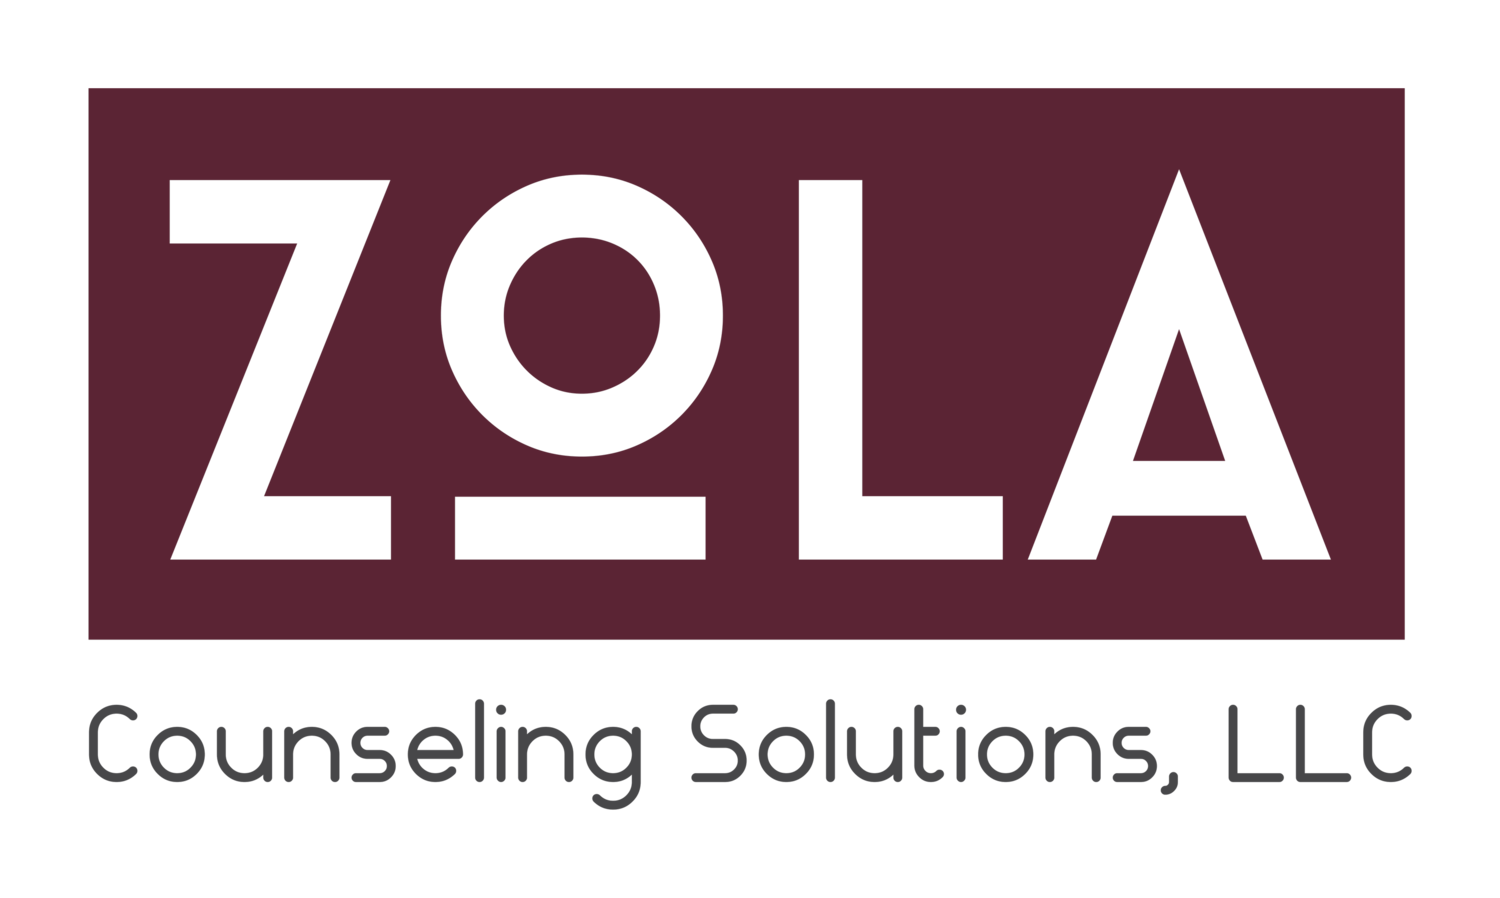 Zola Counseling Solutions, LLC